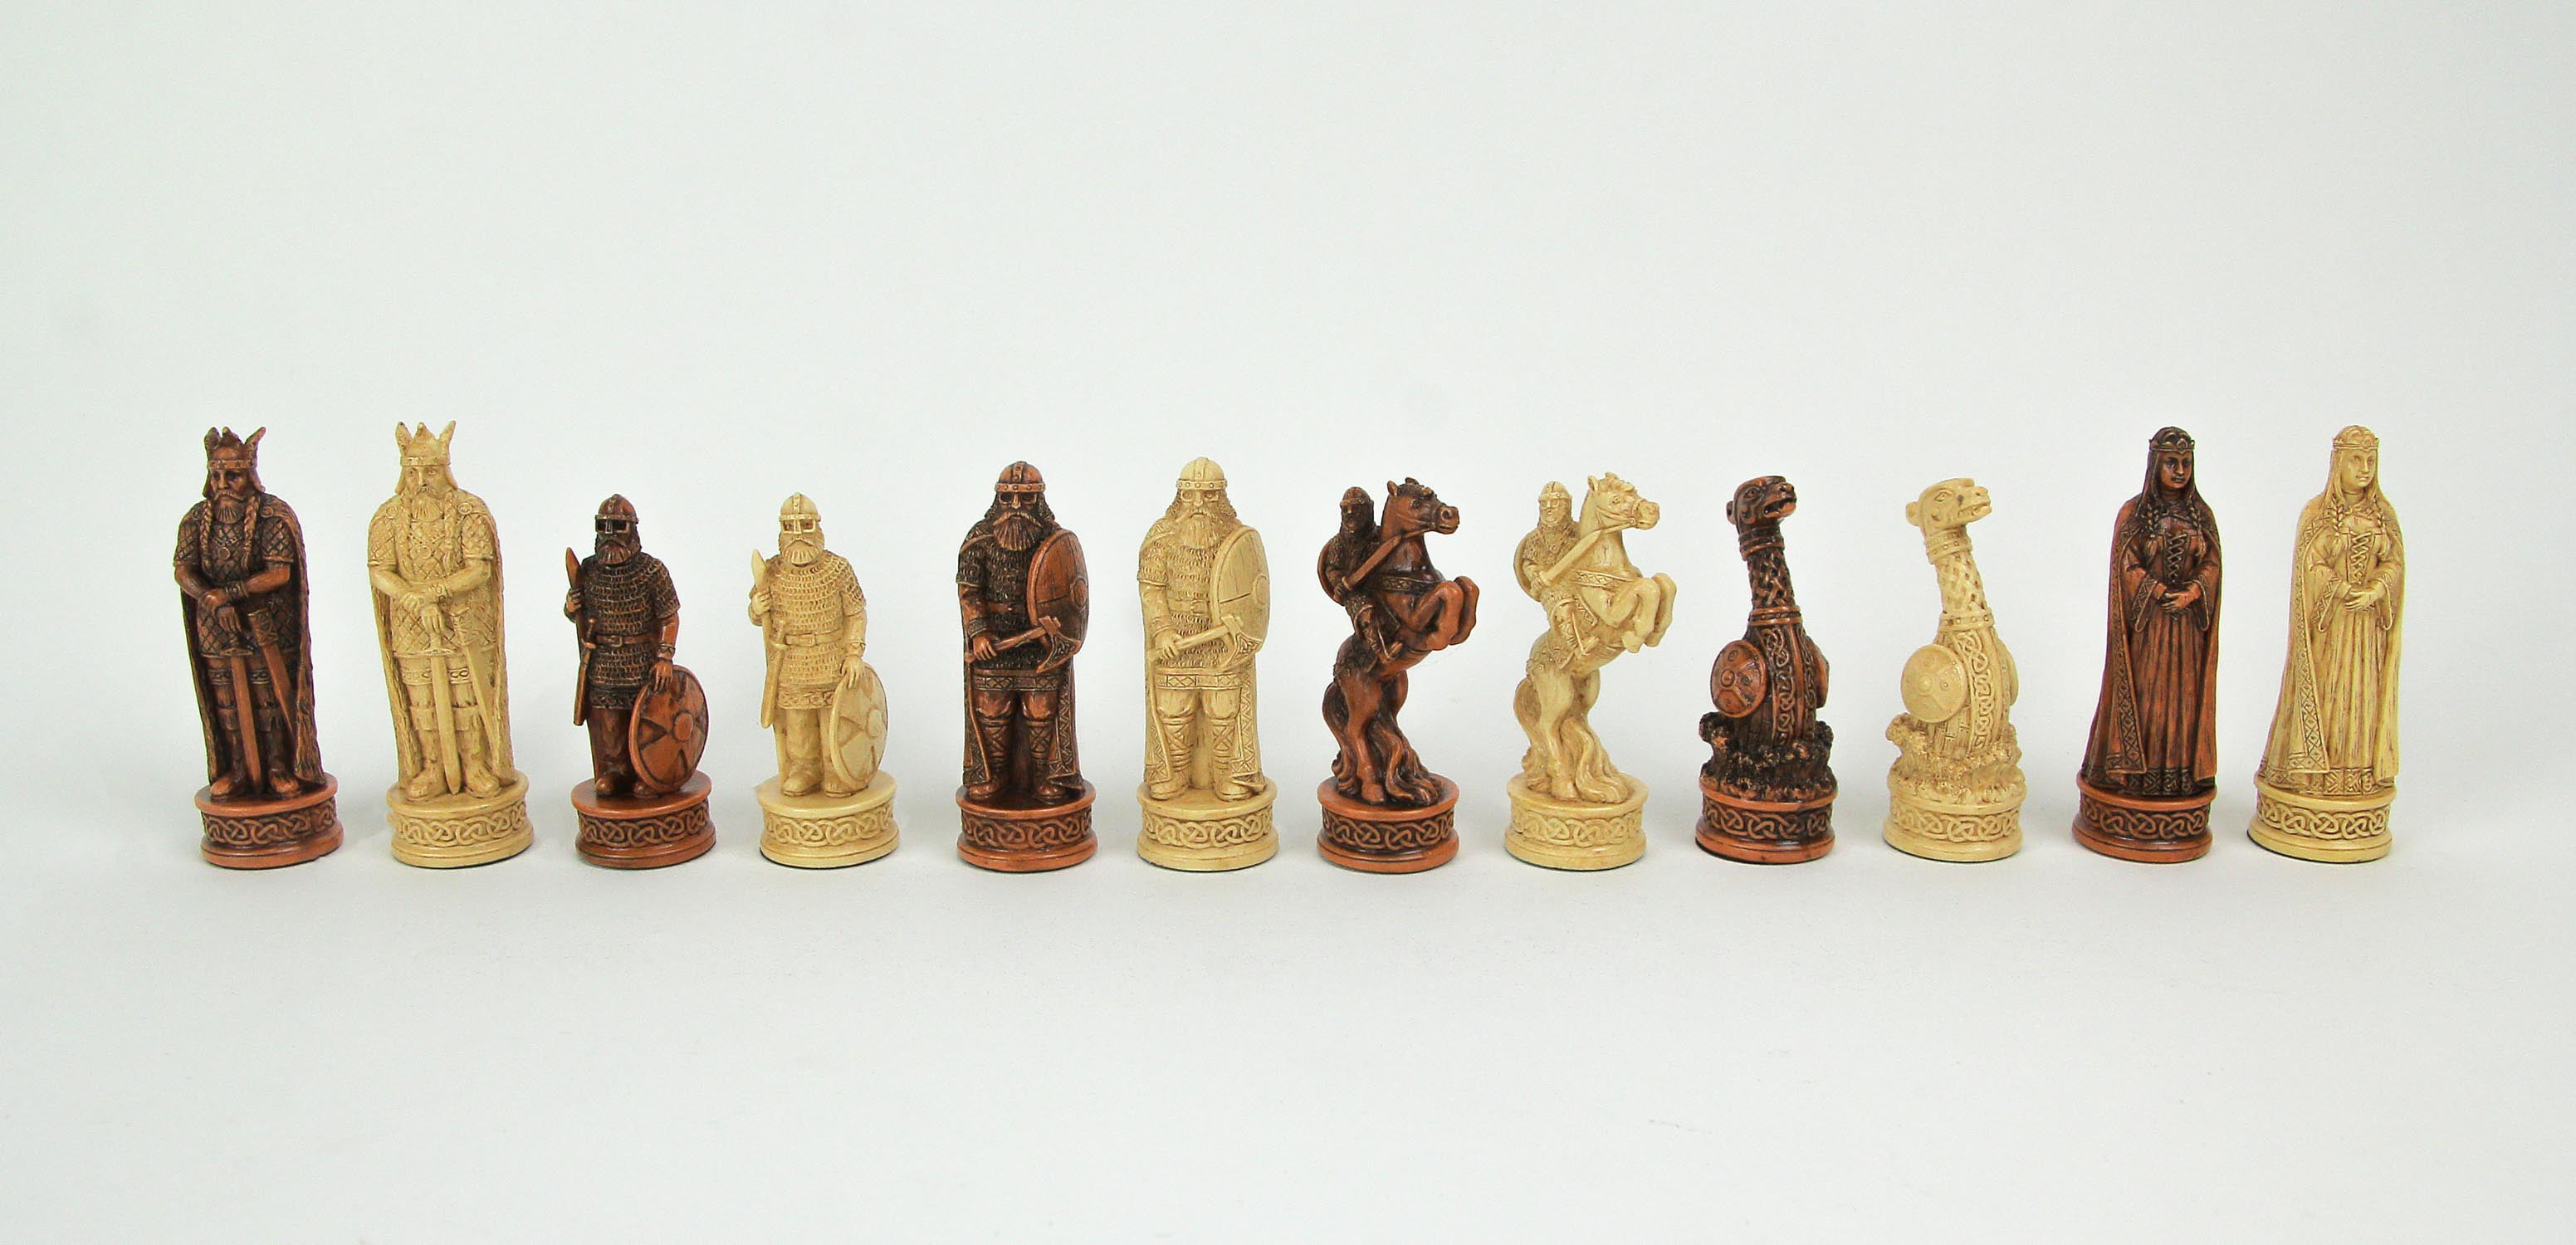 Made to Order Chess Set Viking Design in Black and Mahogany 